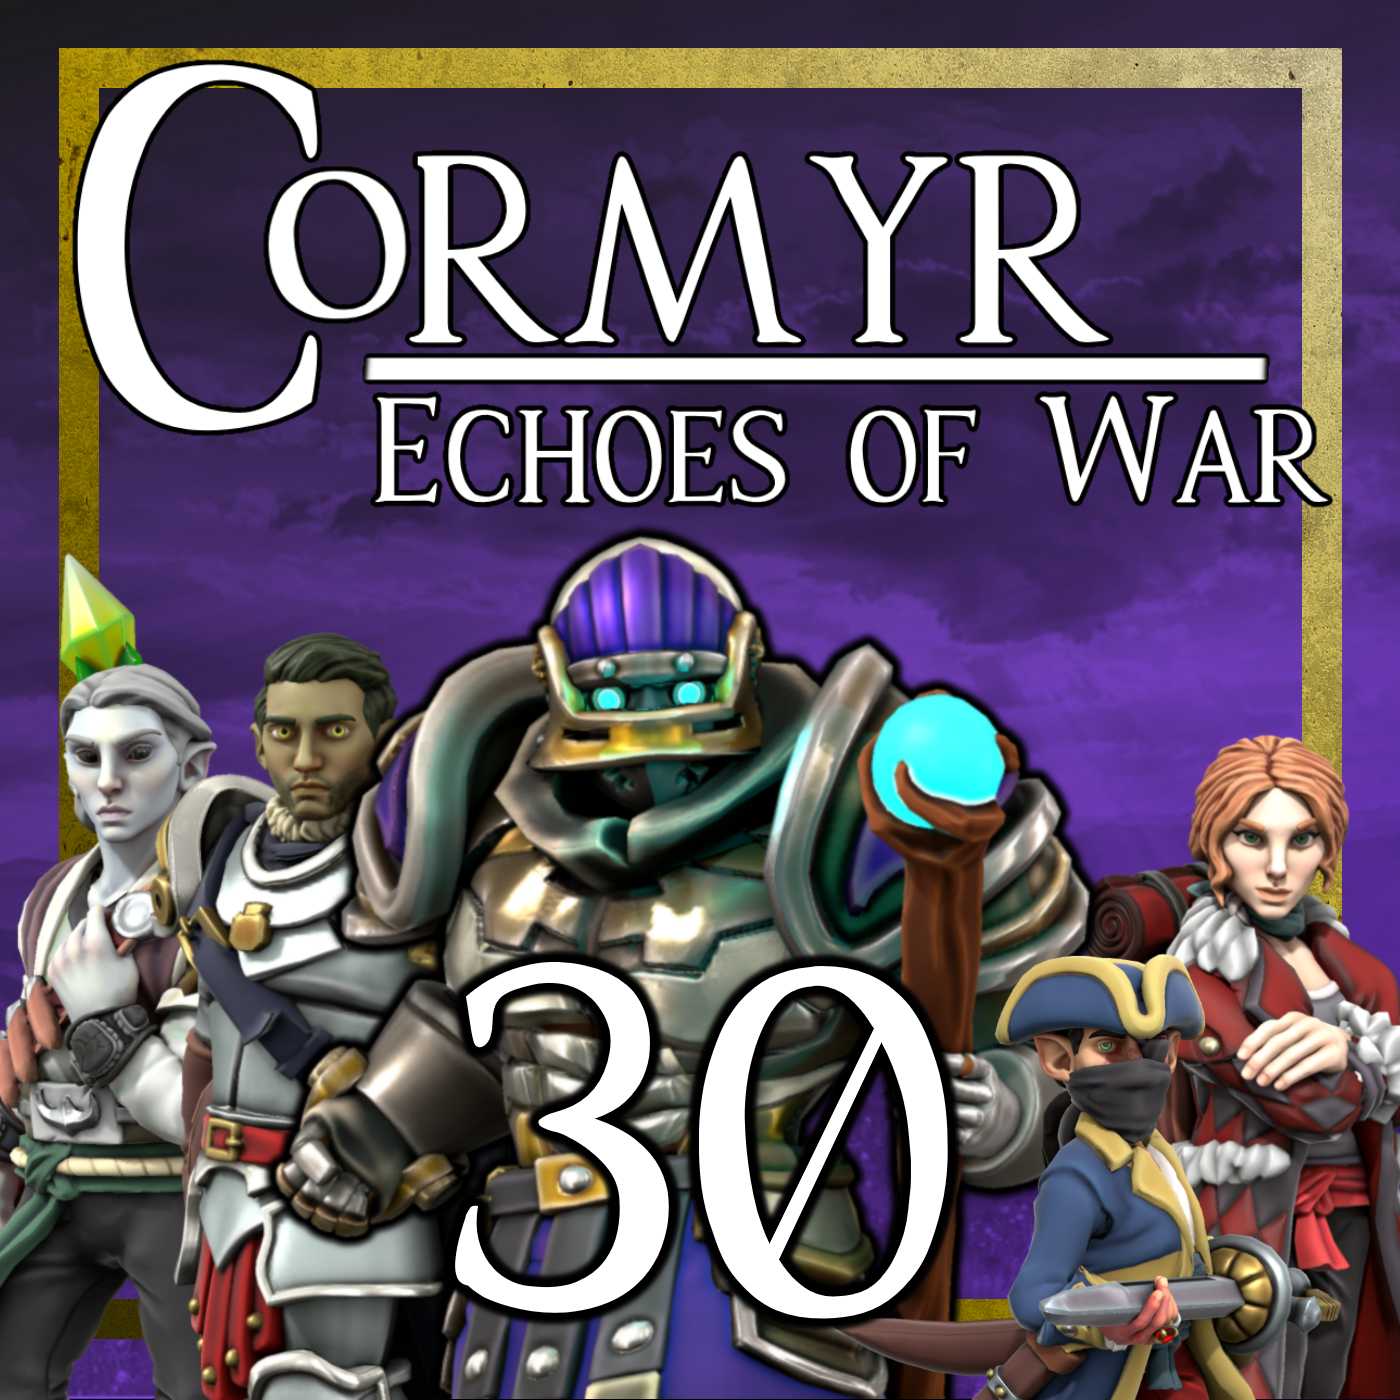 Cormyr: Echoes of War - Ep. 30 - The Jewel of Cormyr